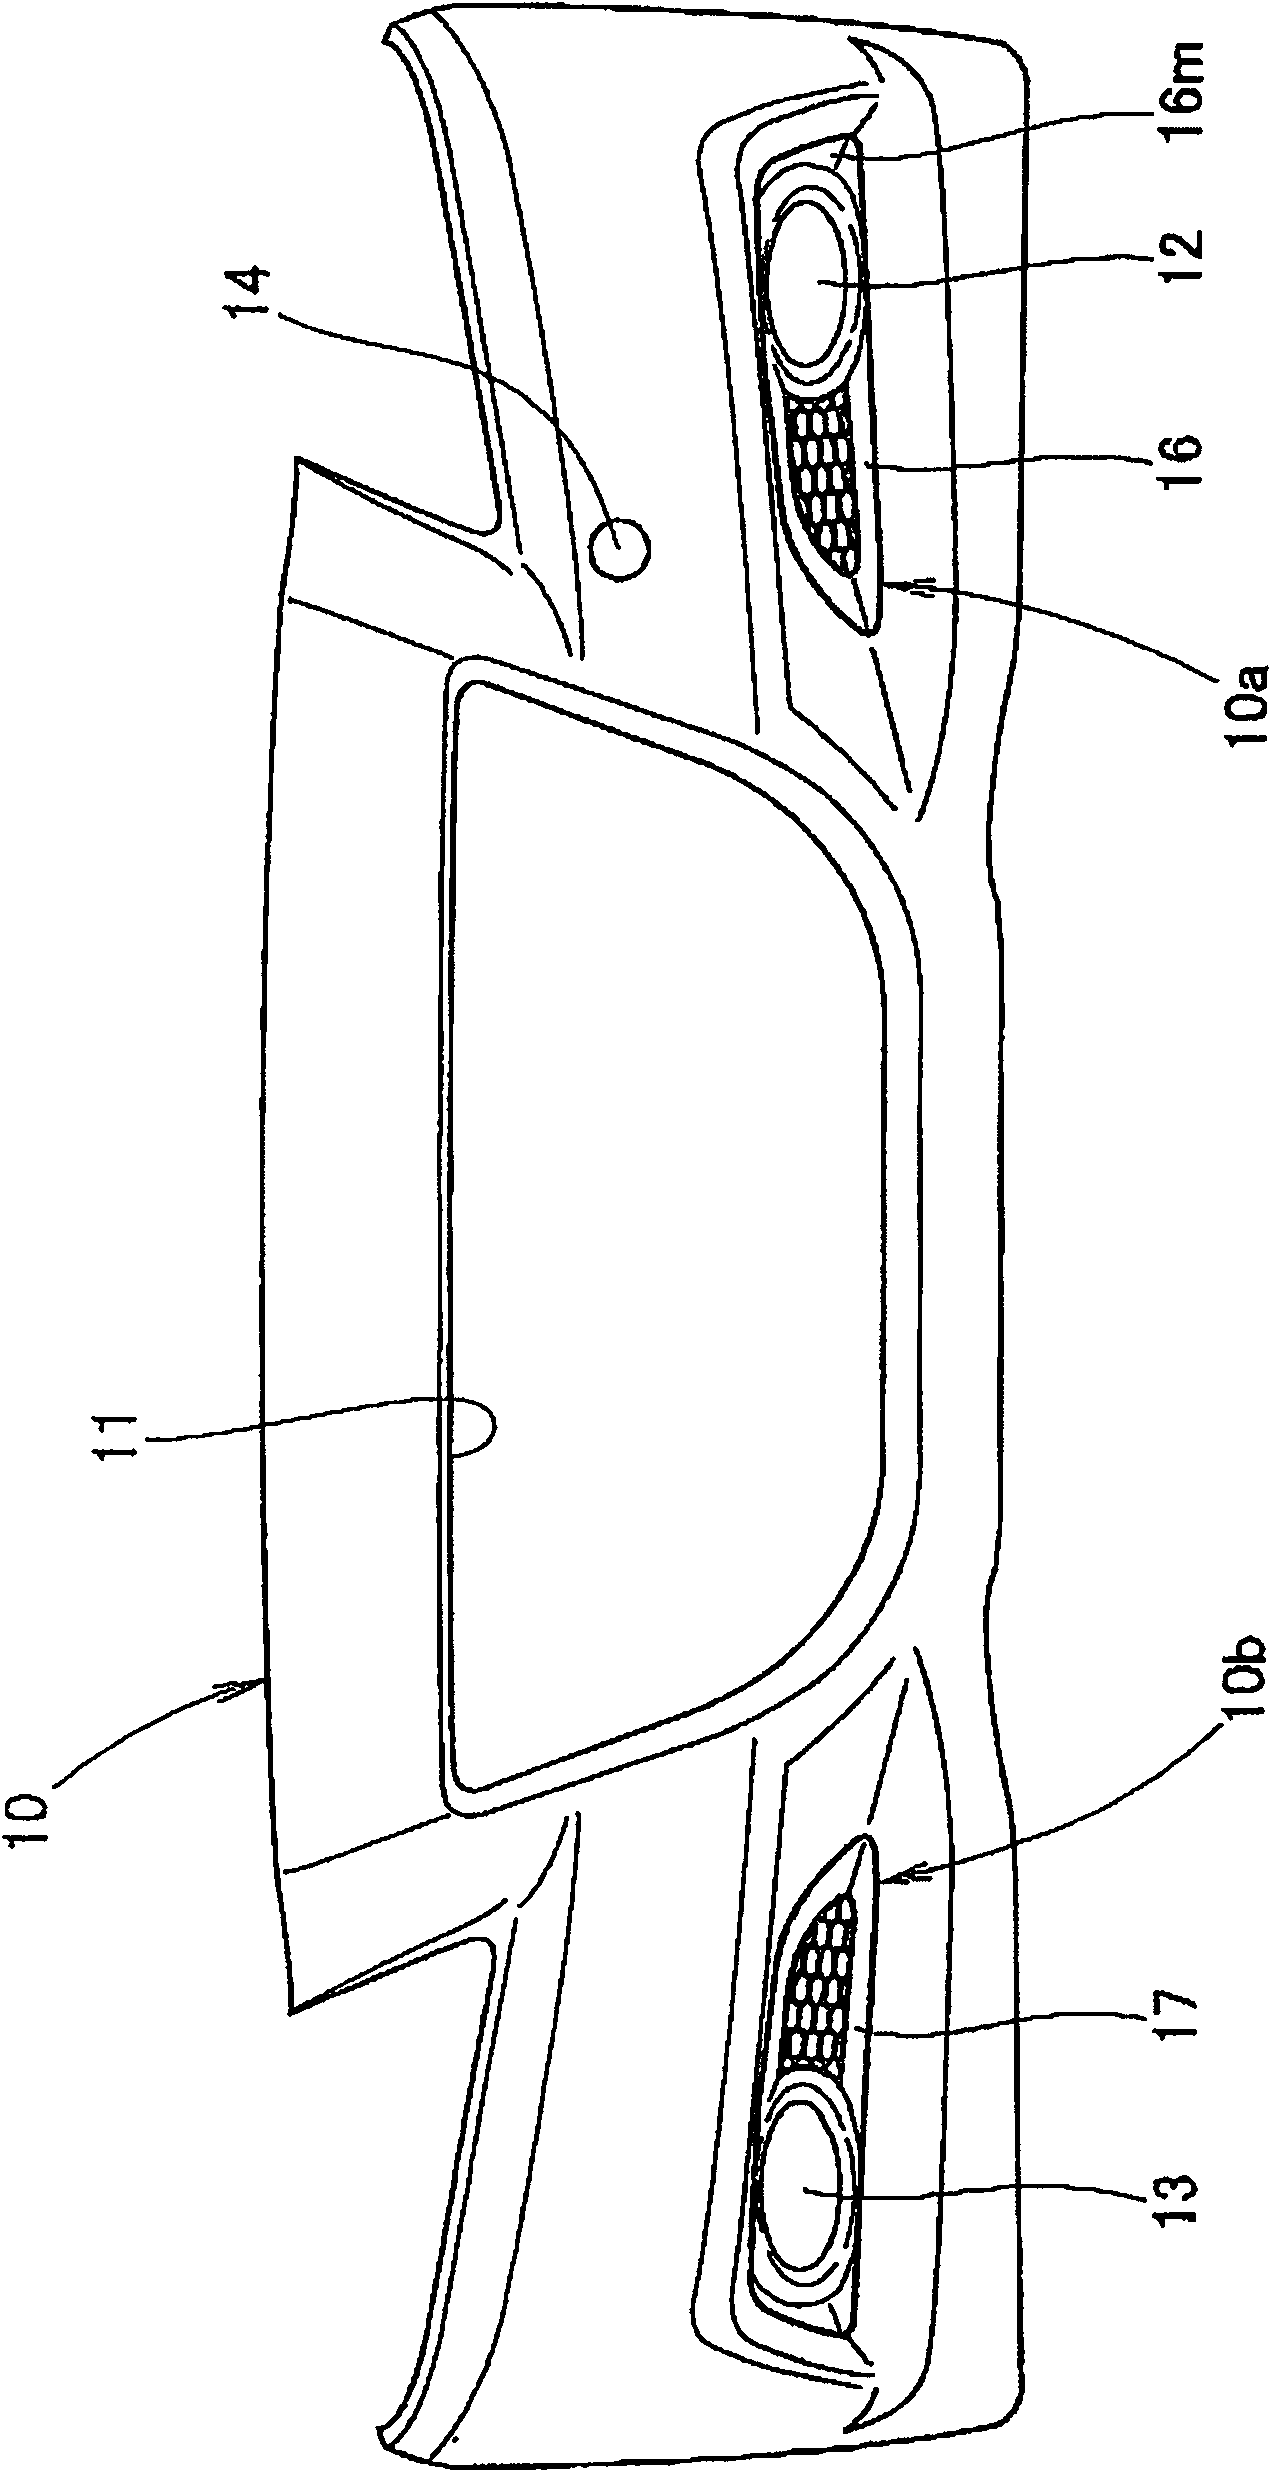 Fog lamp cover mounting structure